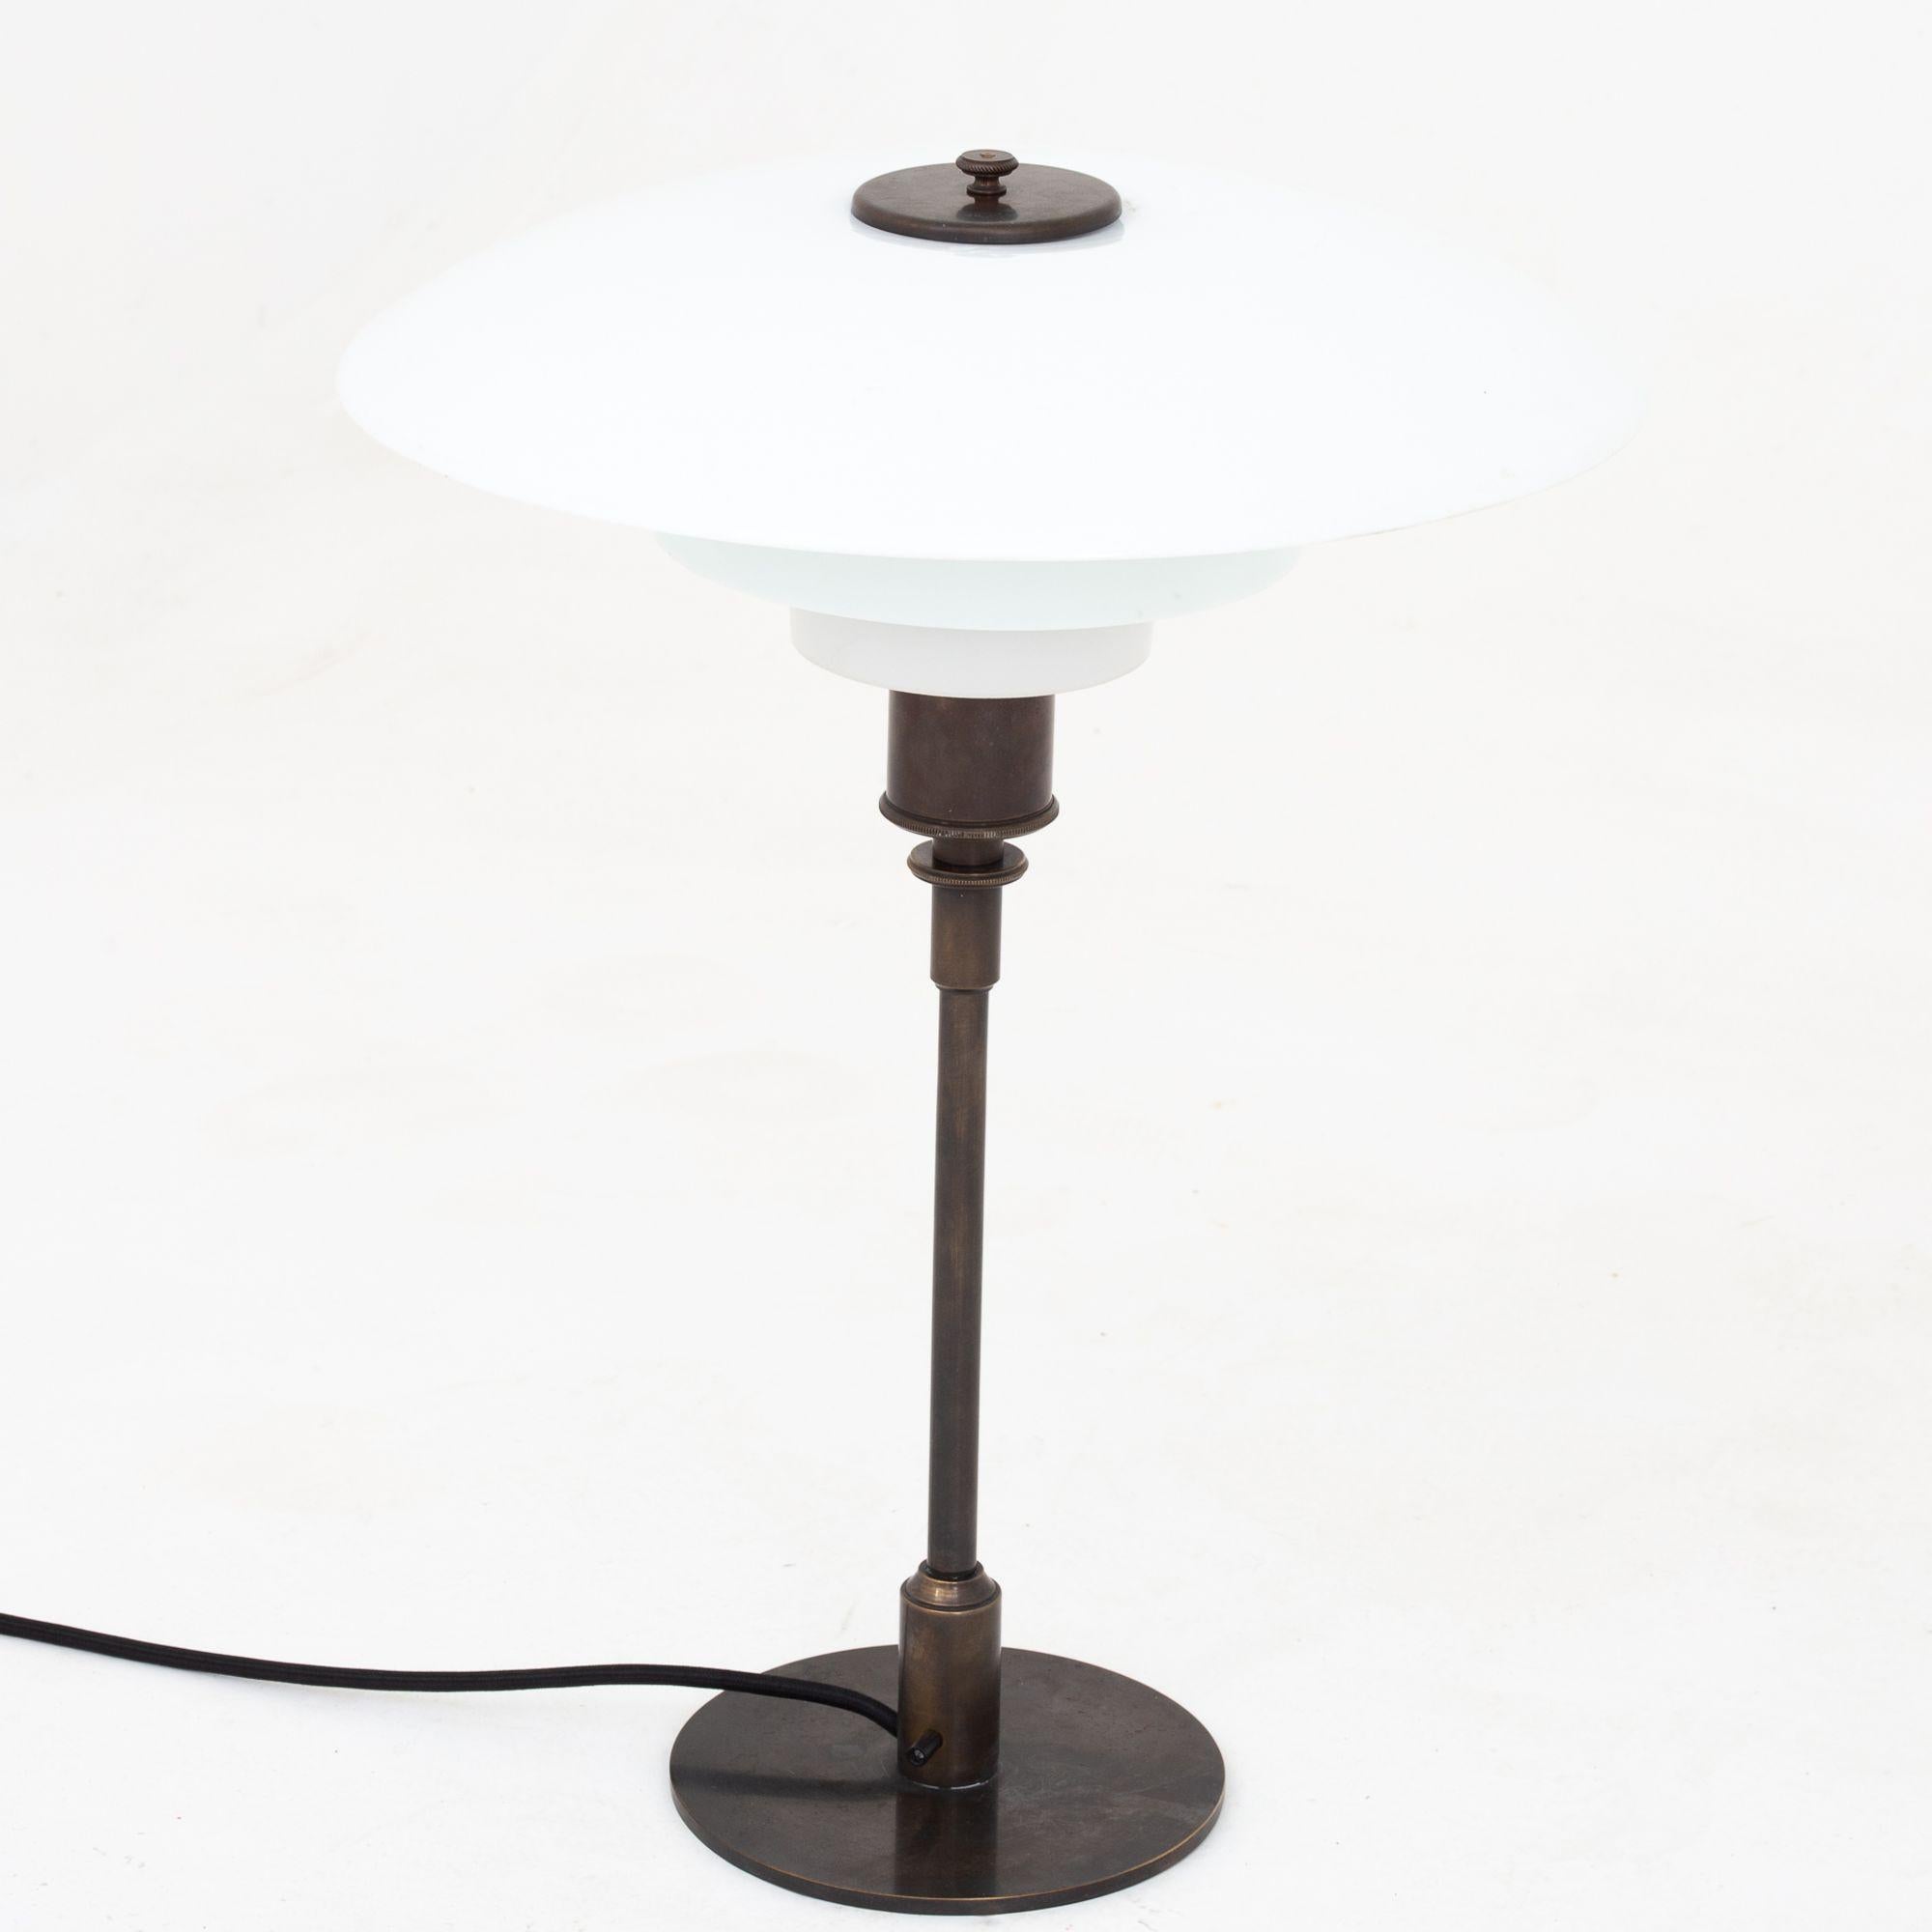 PH 4/3 - table lamp in browned brass w. white opal glass shades. Marked 'Patented'. Poul Henningsen / Louis Poulsen.